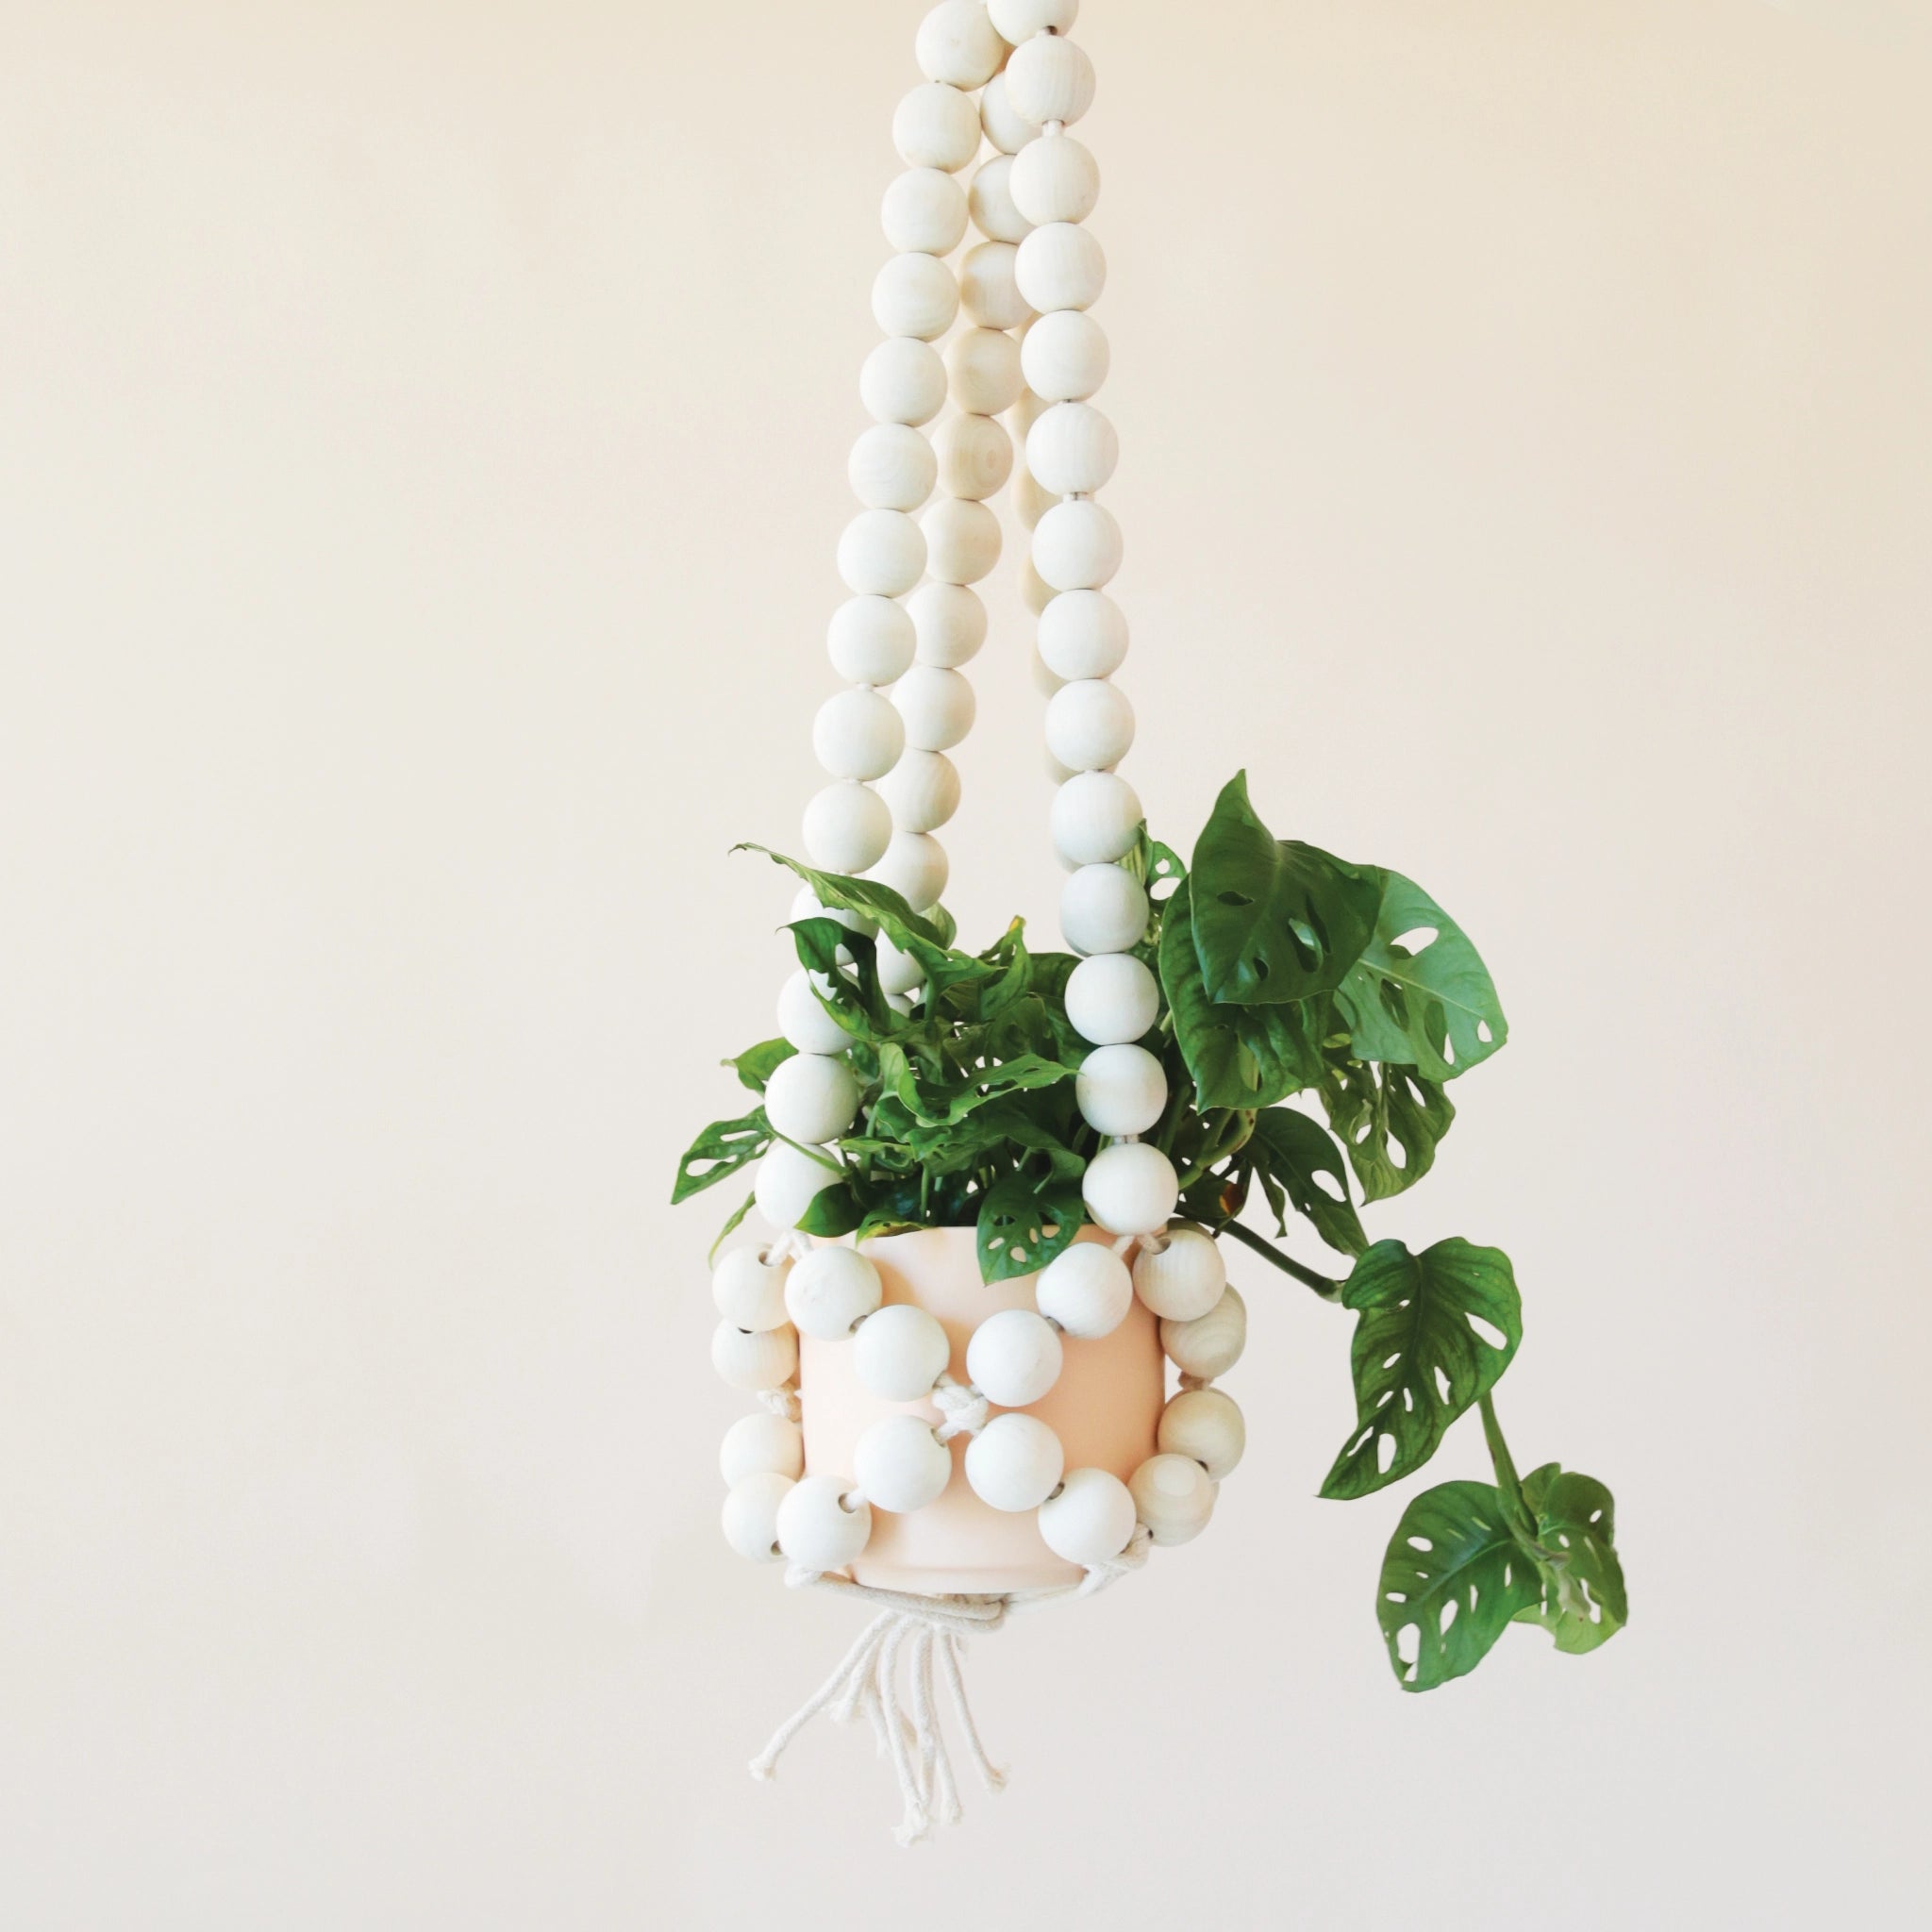 A plant hanger made of large round wooden beads forming a basket shape and coming together at the top to hang. There is a green leafy Swiss cheese plant  inside the plant hanger that is not included with purchase.